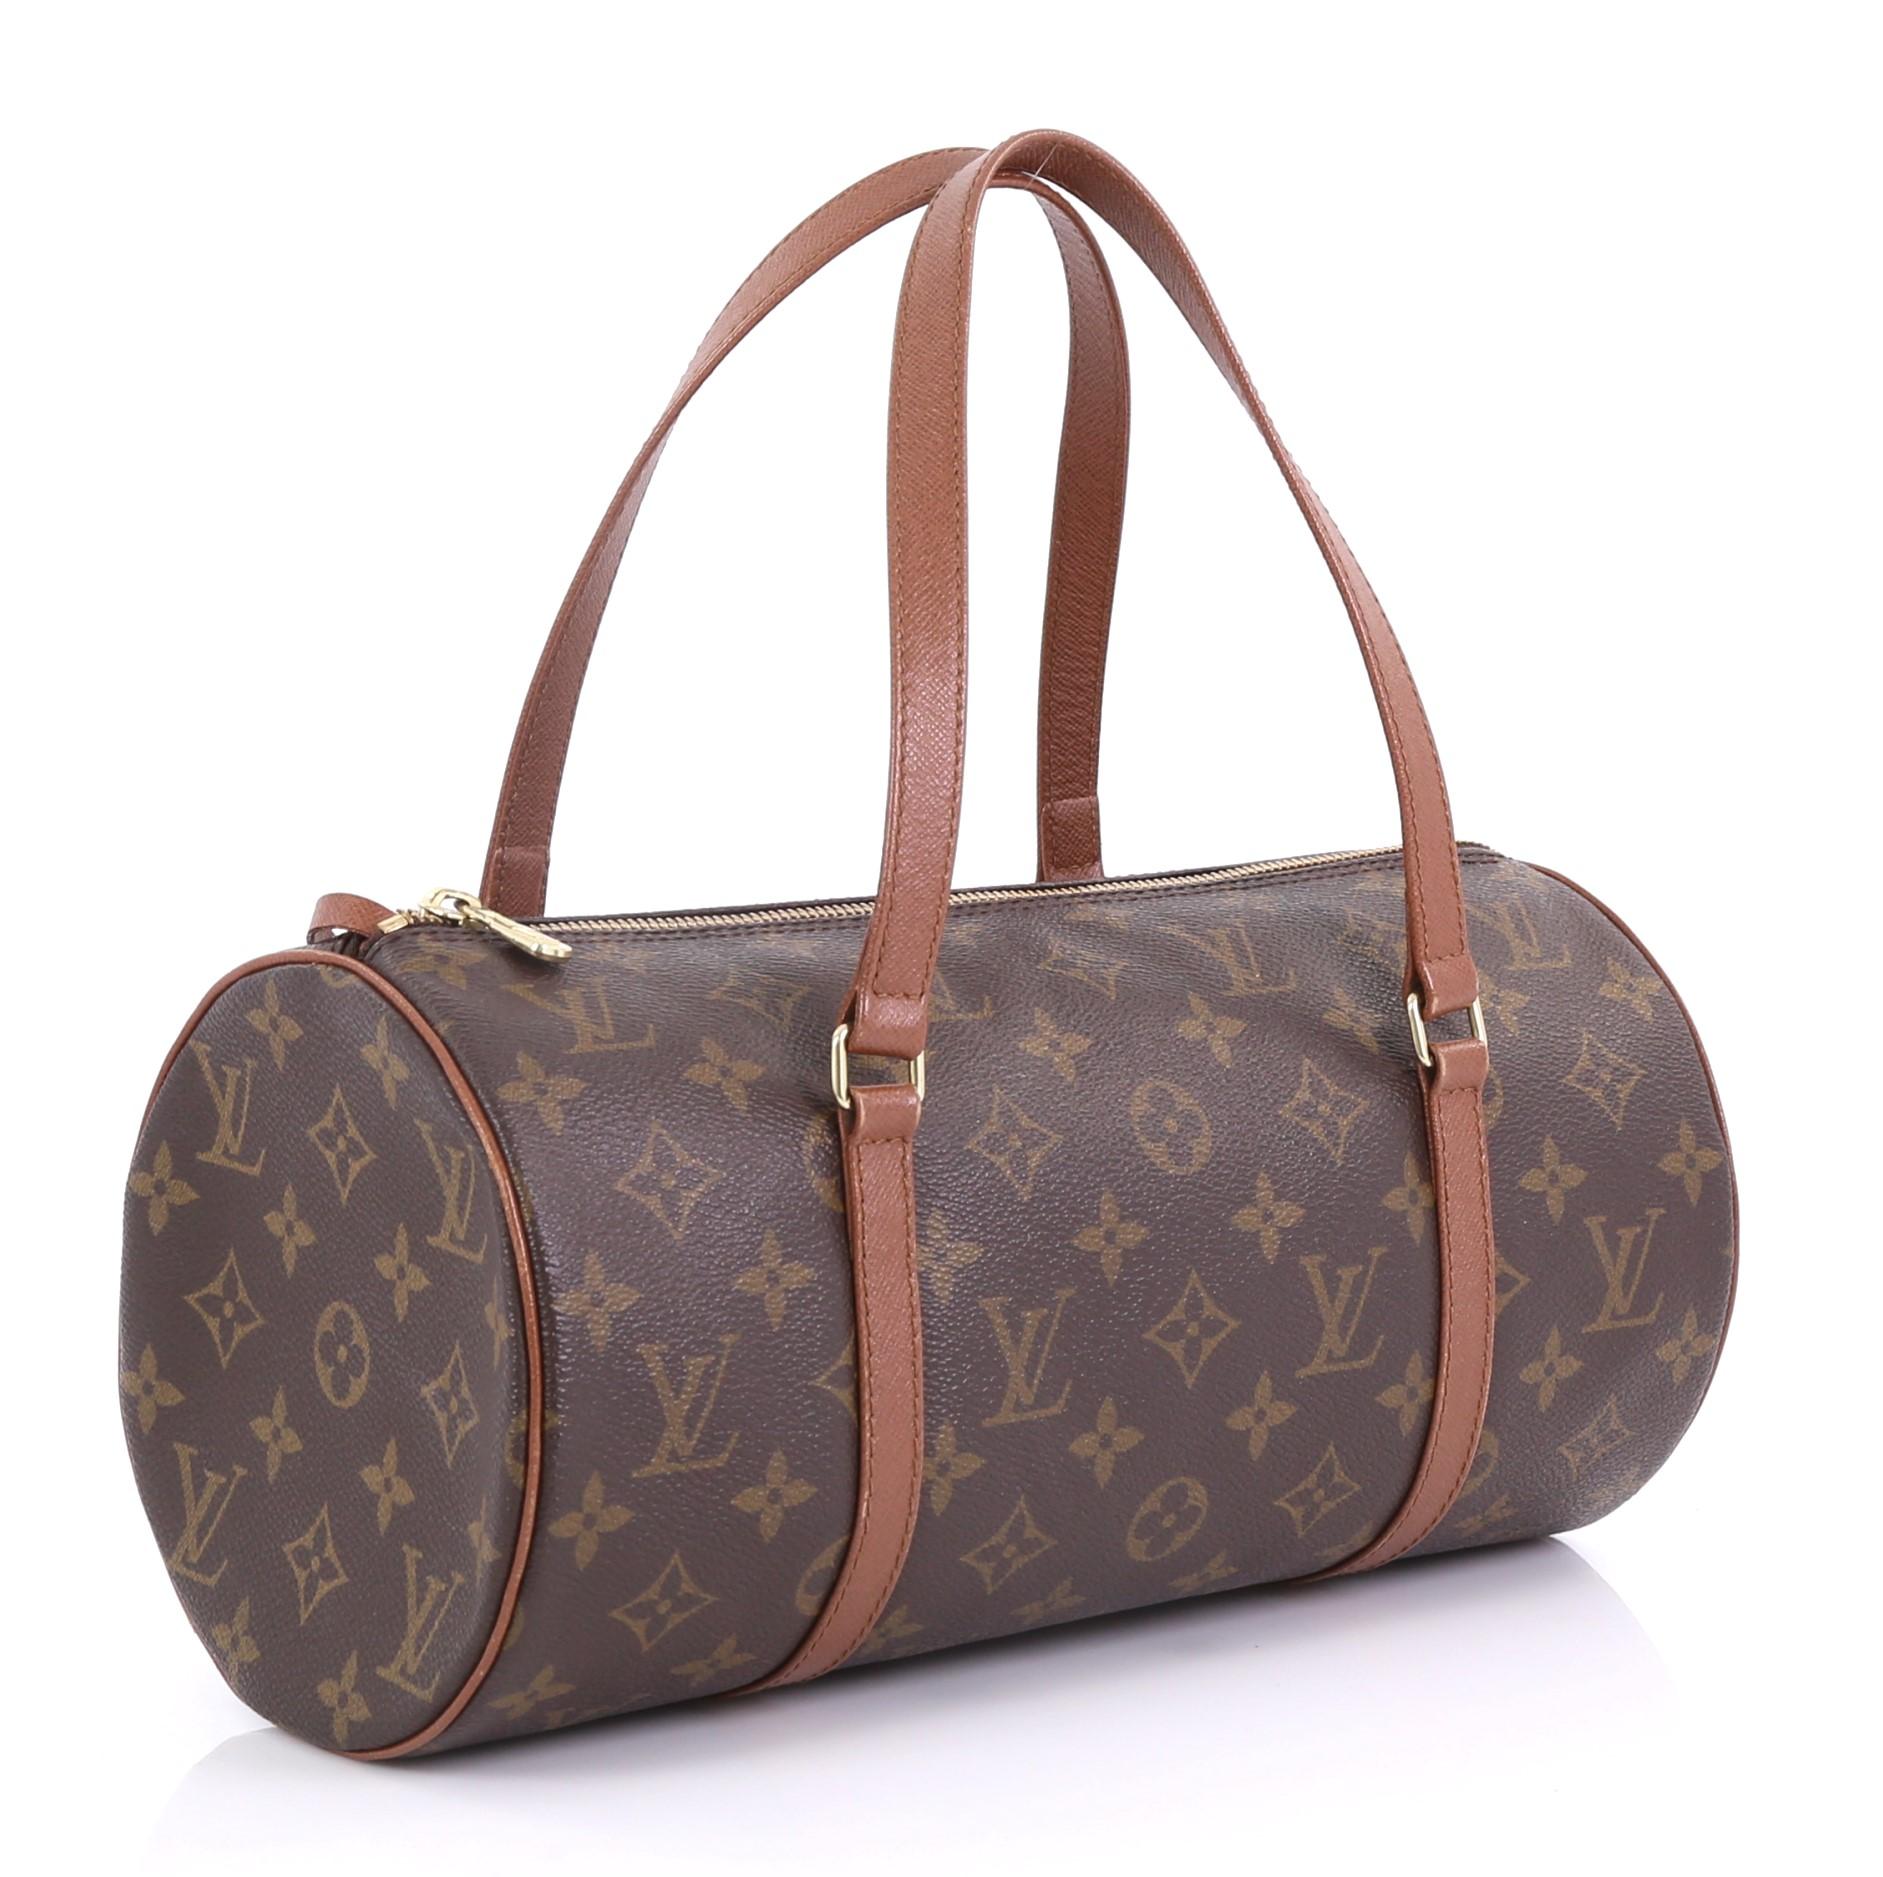 This Louis Vuitton Papillon Handbag Damier 30, crafted with damier ebene coated canvas, features dual leather handles, leather trim, and gold-tone hardware. Its zip closure opens to a brown leather interior. Authenticity code reads: NO0913.